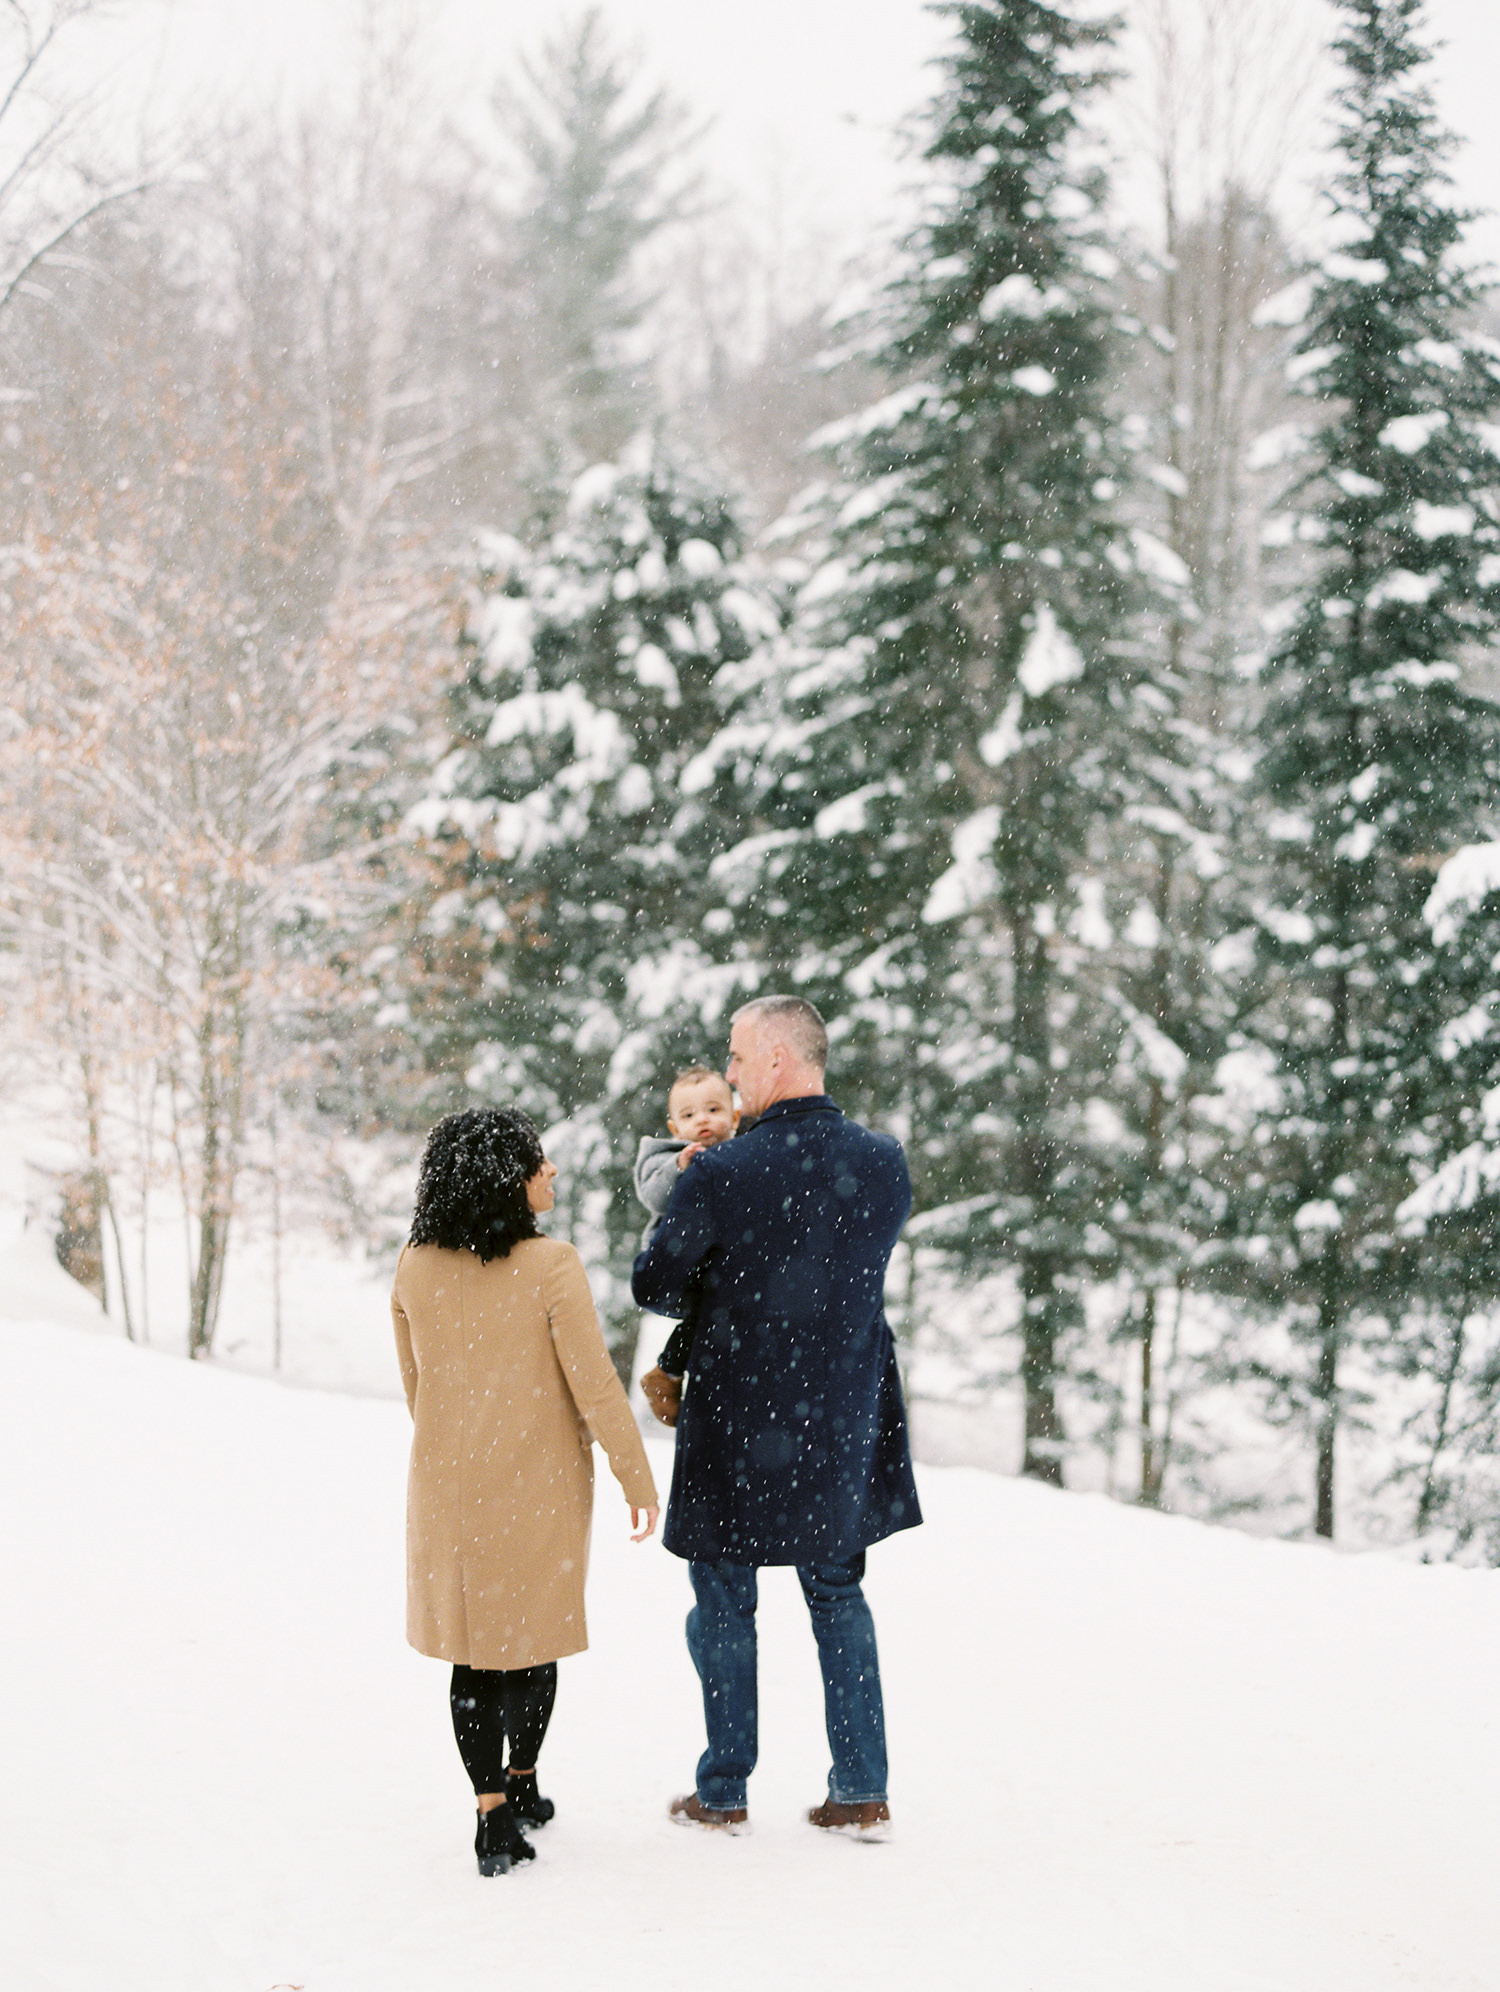 Winter family photo in snow with 1 year old. Lake Placid, New York by Adirondack Photographer Mary Dougherty